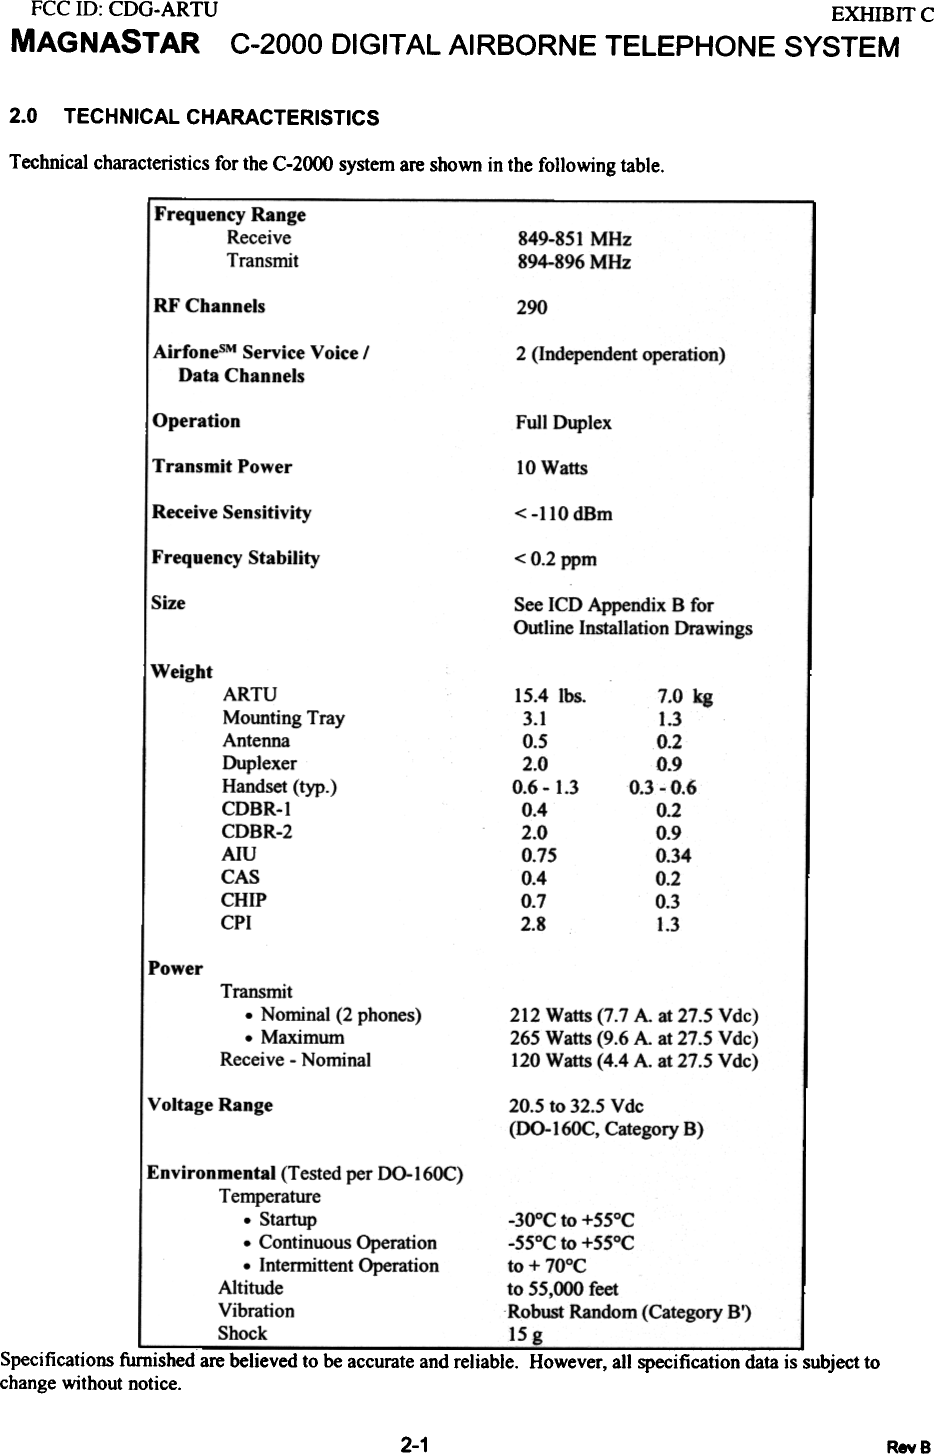 FCC 10: CDG-ARTUMAGNASTAR EXHIBITCC-2000 DIGITAL AIRBORNE  TELEPHONE  SYSTEM2.0 TECHNICAL CHARACTERISTICSTechnical characteristics for the C-2000 system are shown in the following  table.Frequency RangeReceiveTransmit 849-851 MHz894-896 MHzRF Channels 290AirfonesM Service Voice IData Channels 2 (Independent operation)Operation Full DuplexTransmit  Power 10 WattsReceive Sensitivity &lt; -110 dBmFrequency Stability &lt; 0.2 ppm!Size See ICD Appendix B forOutline Installation DrawingsWeight7.0  kg1.30.20.90.3  -  0.60.20.90.340.20.31.3ARTUMounting TrayAntennaDuplexerHandset (typ.)CDBR-ICDBR-2AIUCASCHIPCPI15.4 Ibs3.10.52.00.6  -  1.30.42.00.750.40.72.8Power Transmit- Nominal (2 phones)-MaximumReceive - Nominal212 Watts (7.7 A  at 27.5 Vdc)265 Watts (9.6 A. at 27.5 Vdc)120 Watts (4.4 A. at 27.5 Vdc)Voltage Range 20.5 to 32.5 Vdc(00-16OC, Category B)Environmental (Tested per 00-16OC)Temperature. Startup. Continuous Operation.  Intemrittent OperationAltitudeVibrationShock-30°C to +55°C-55°C to +55°Cto + 70°Cto 55,000 feetRobust Random (Category Sf)15 gSpecifications furnished are believed to be accurate and reliable.  However, all specification data is subject tochange without notice.2-1 RevS